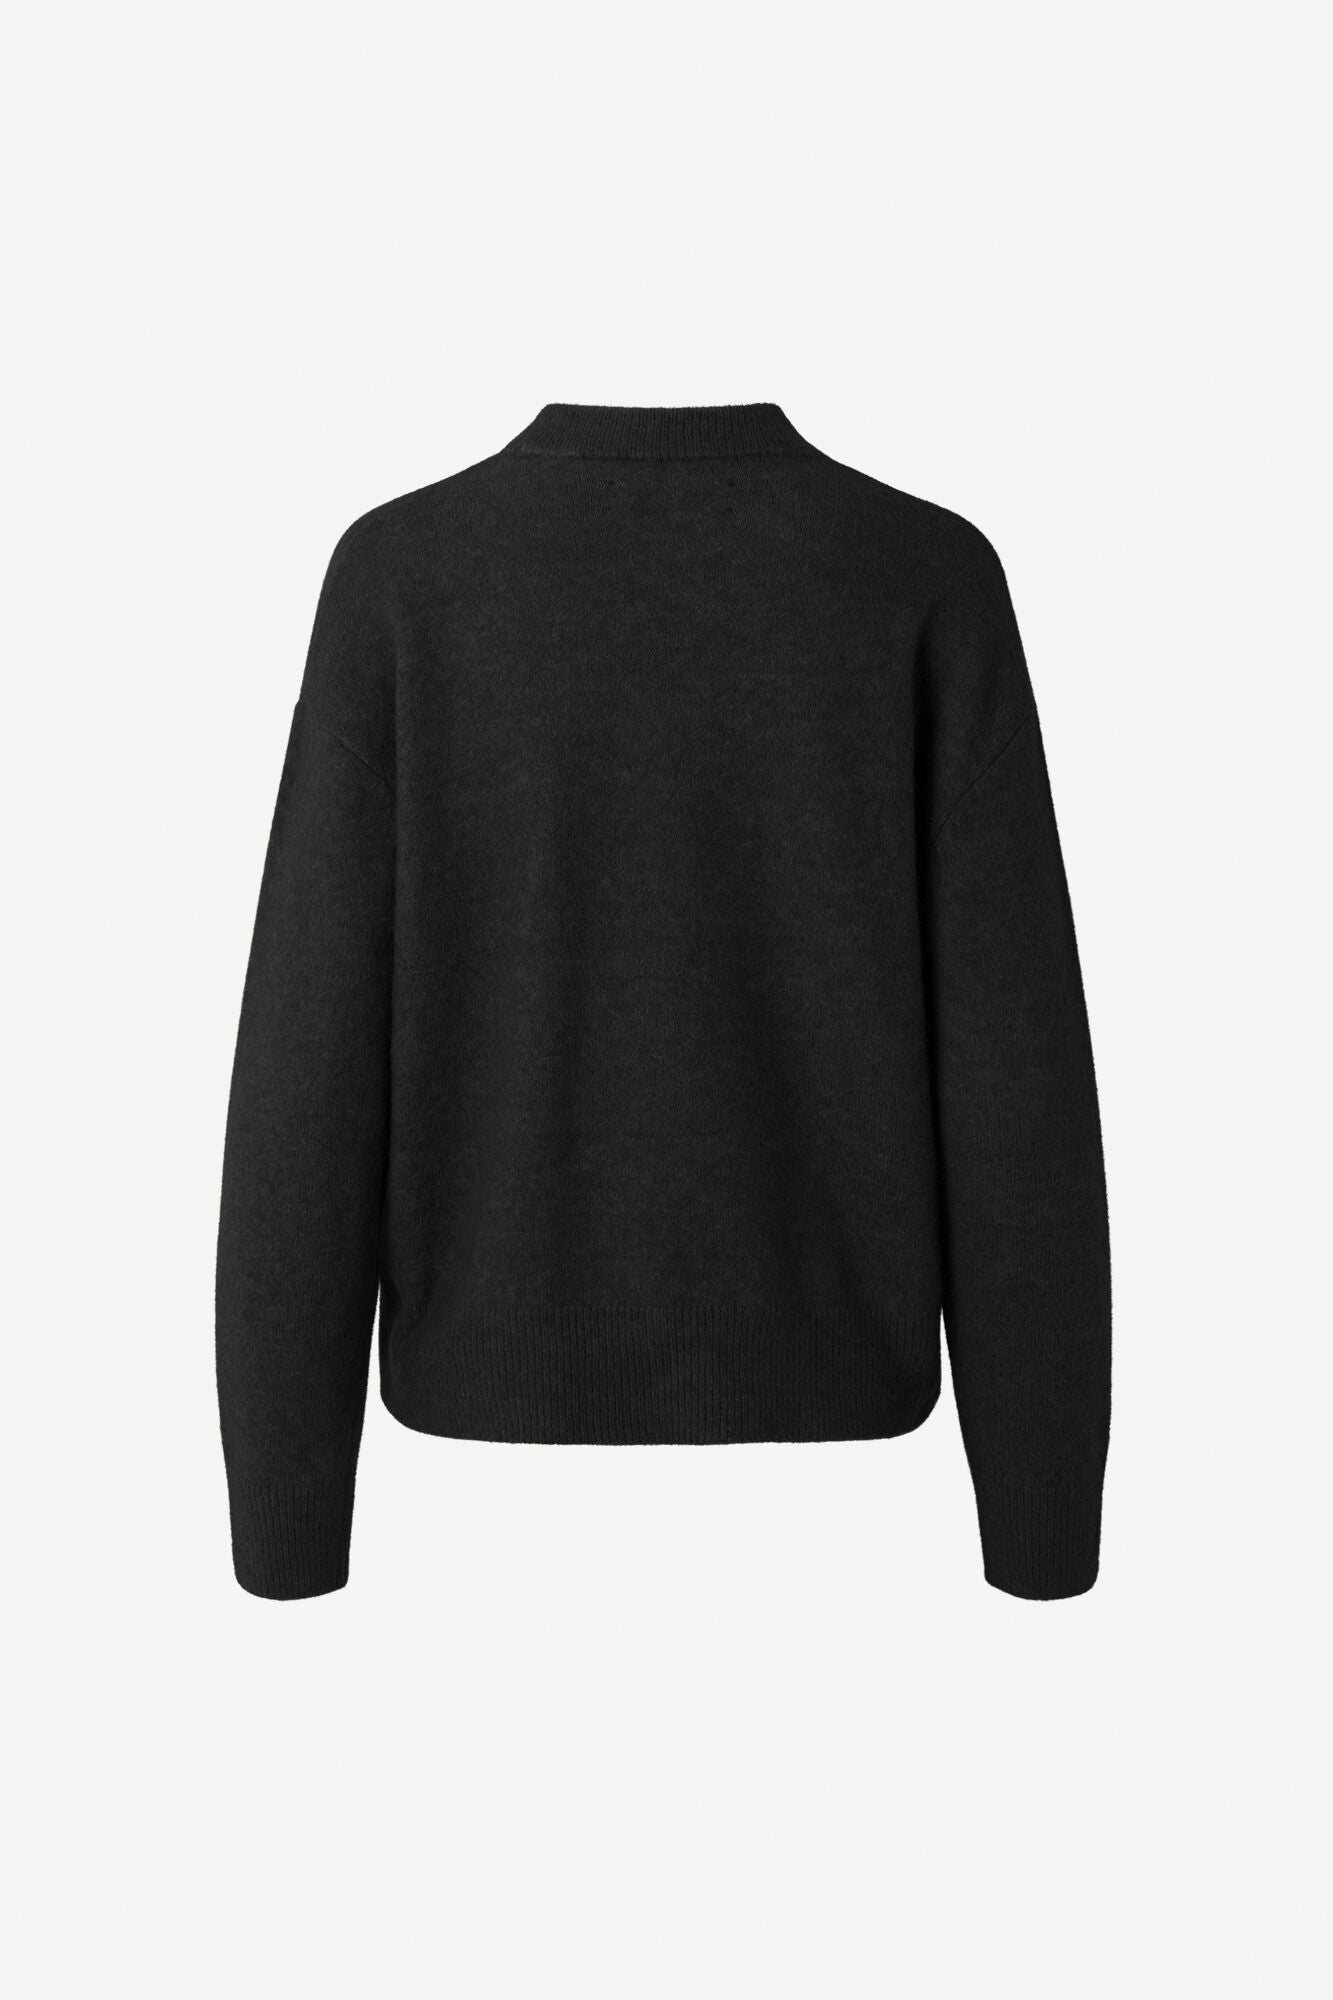 Anour knitted sweater in black